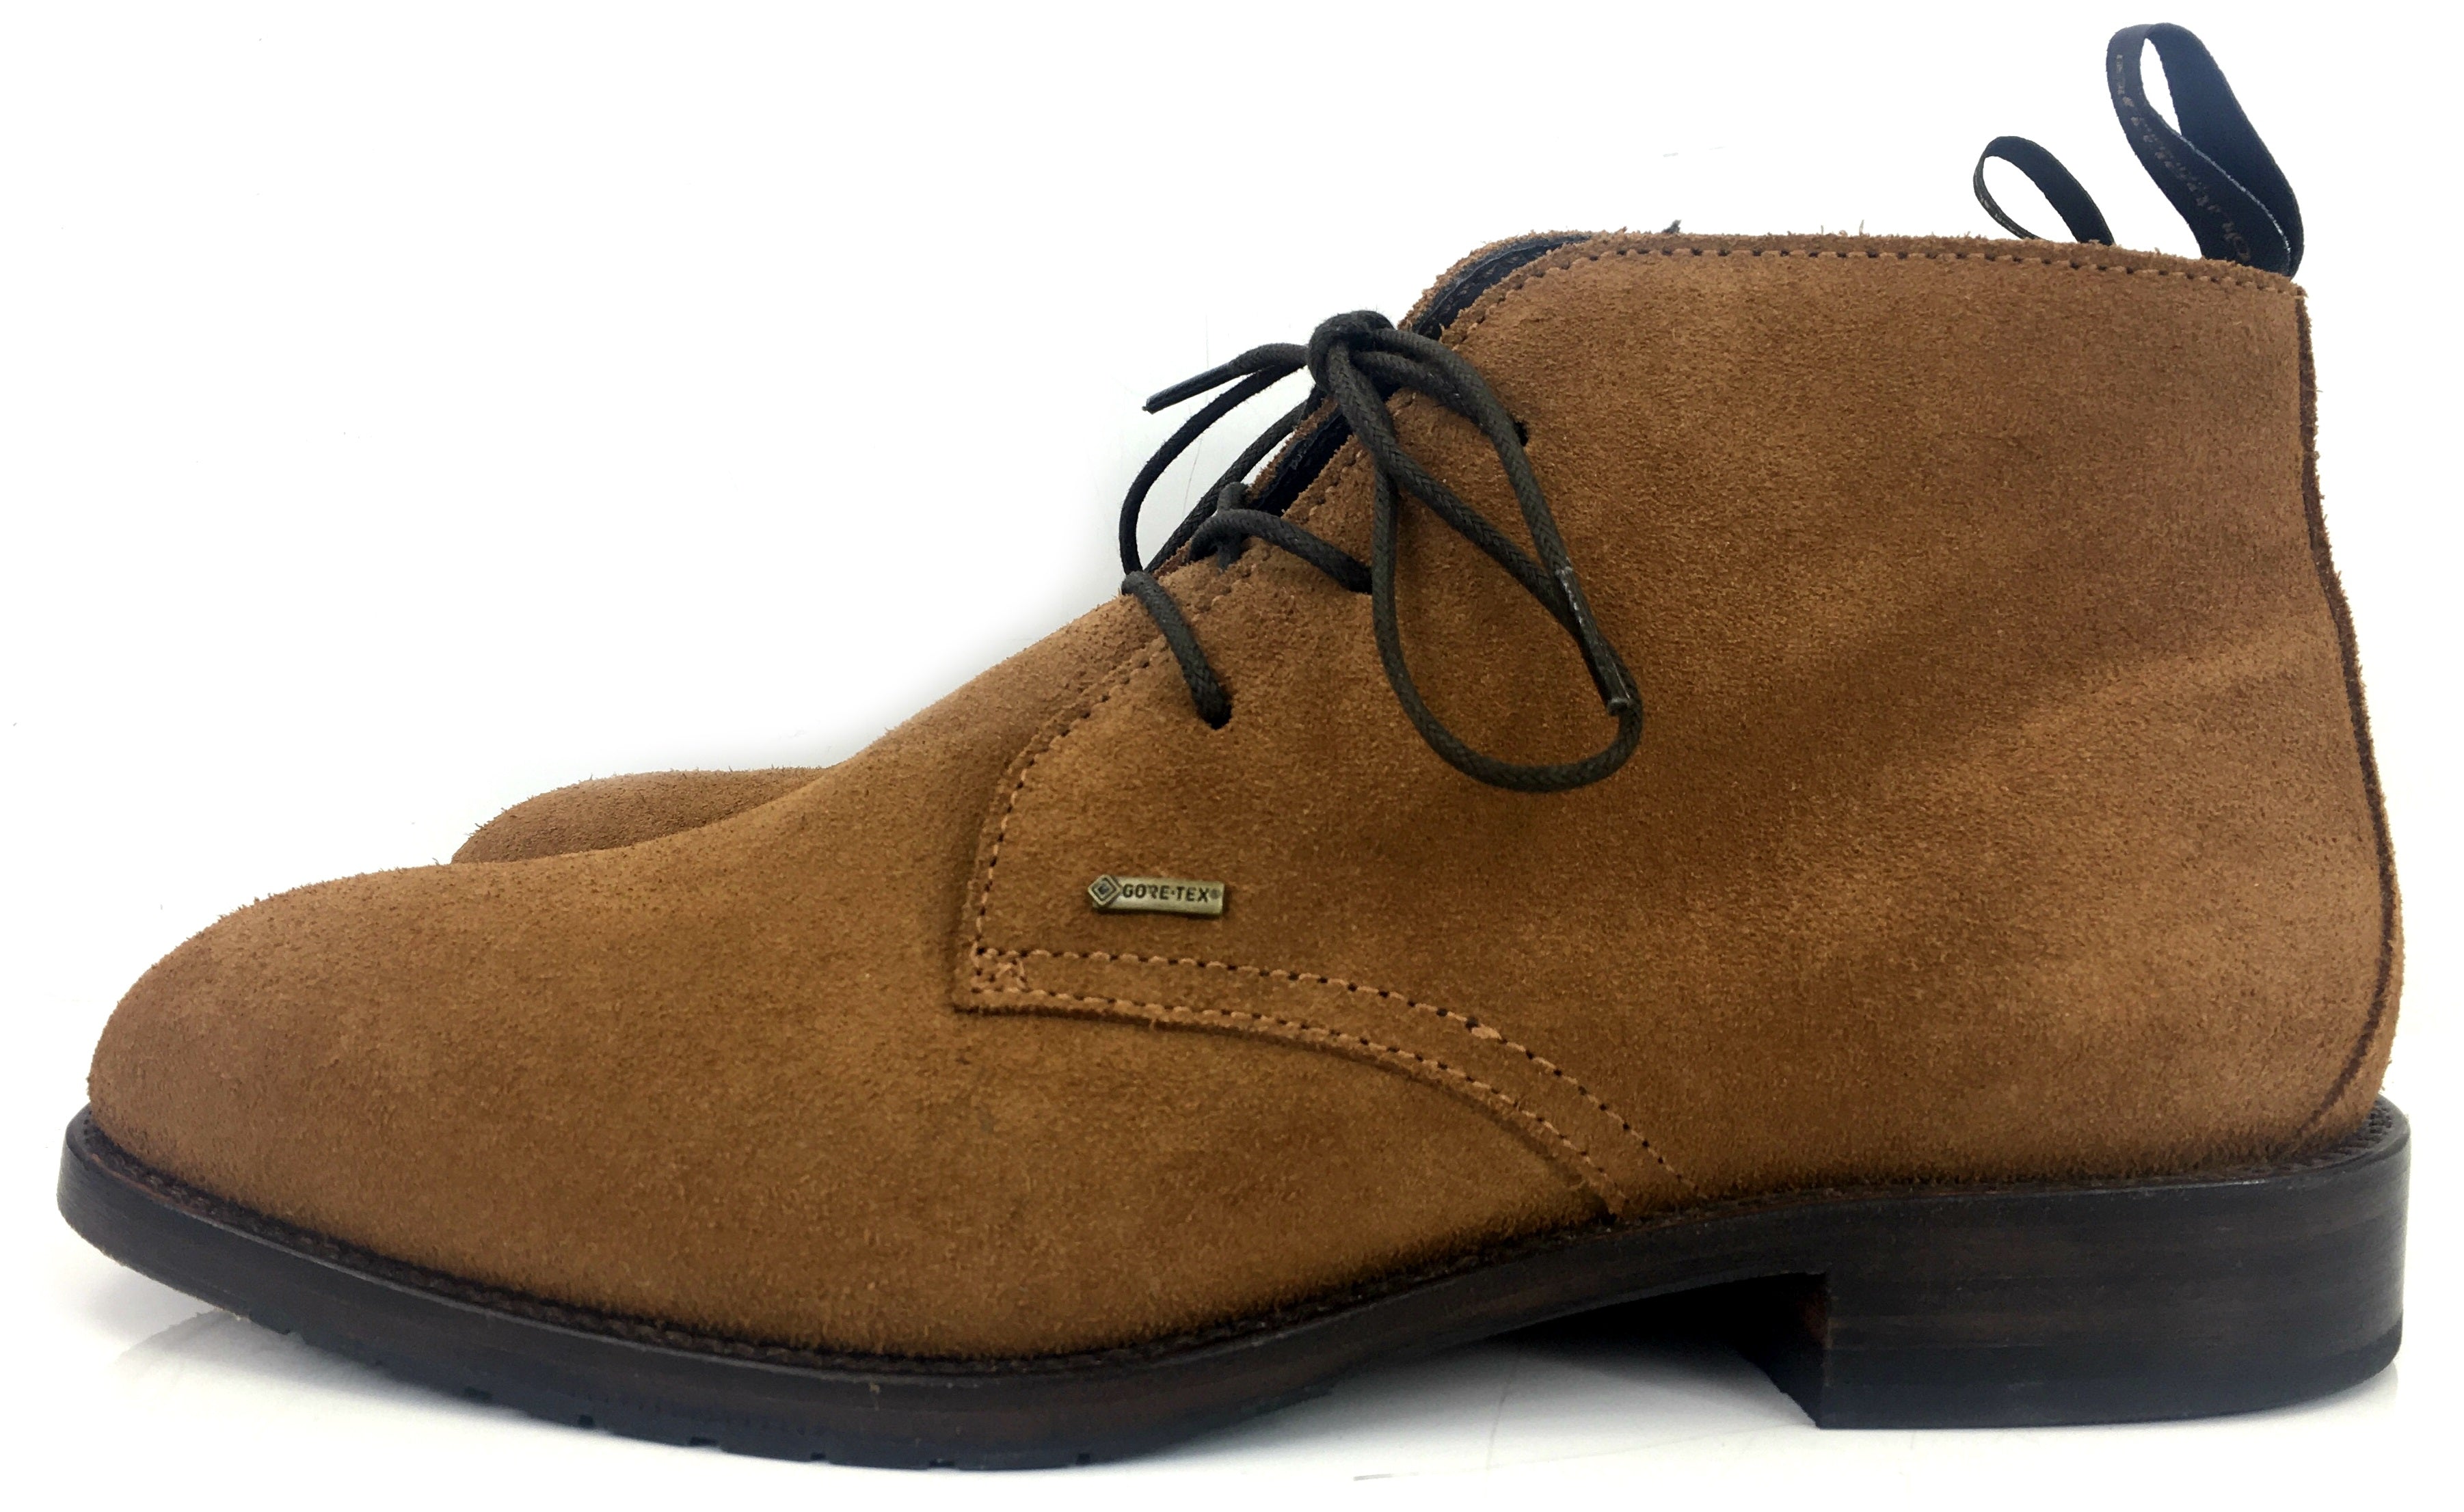 brown suede chukka boots